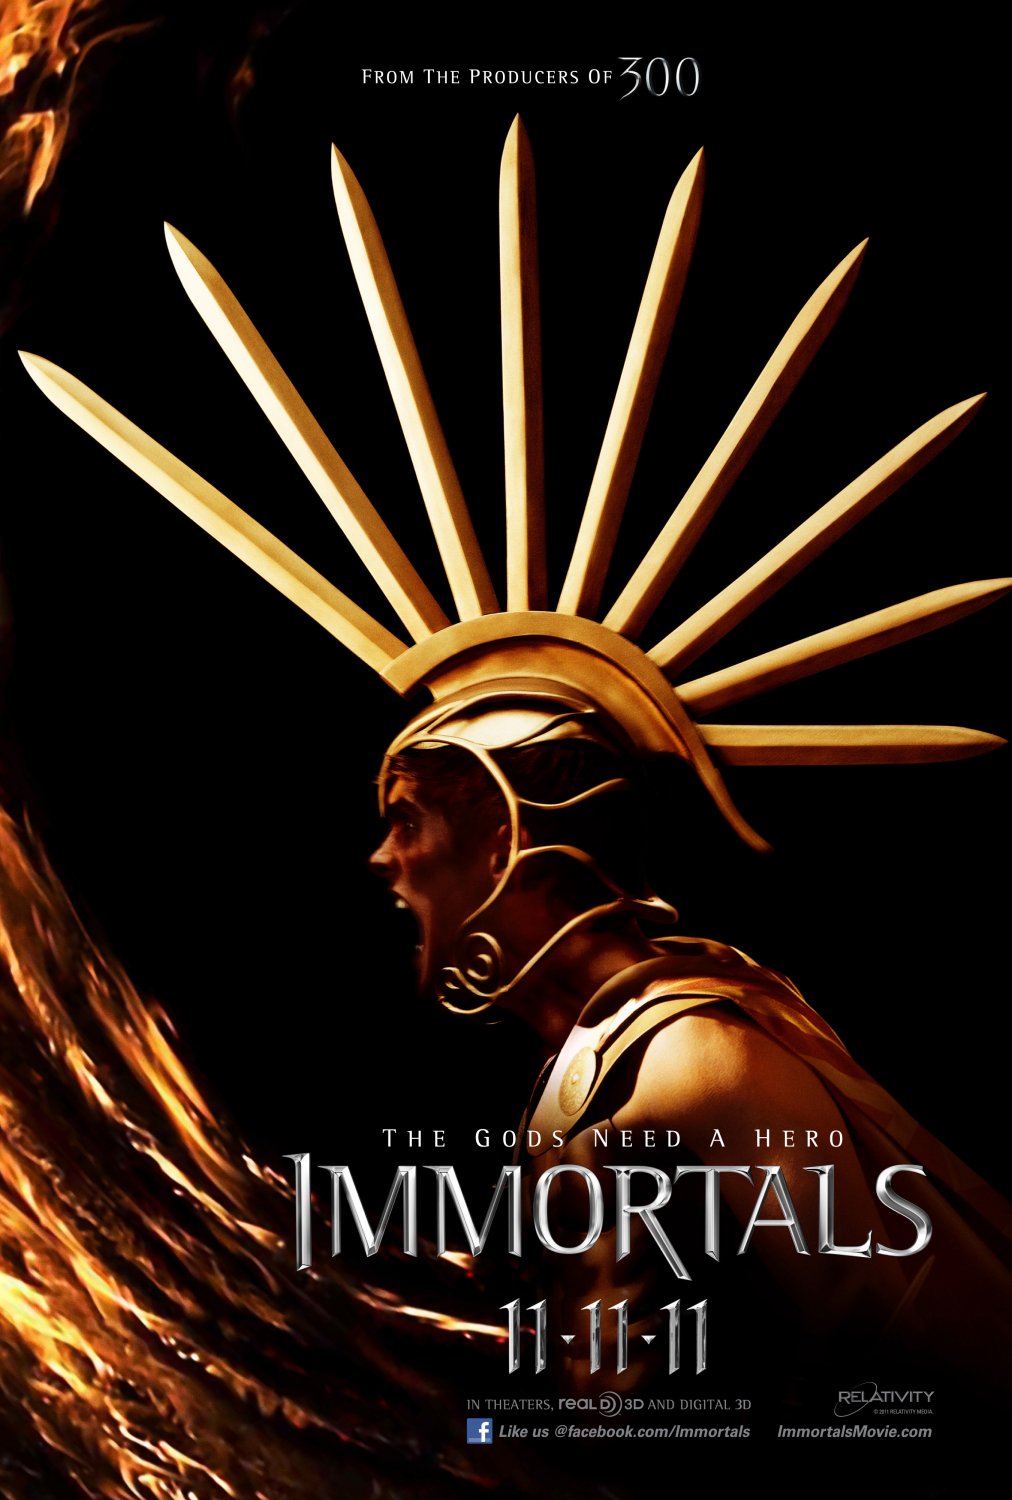 the immortals 1995 movie online free 123movies